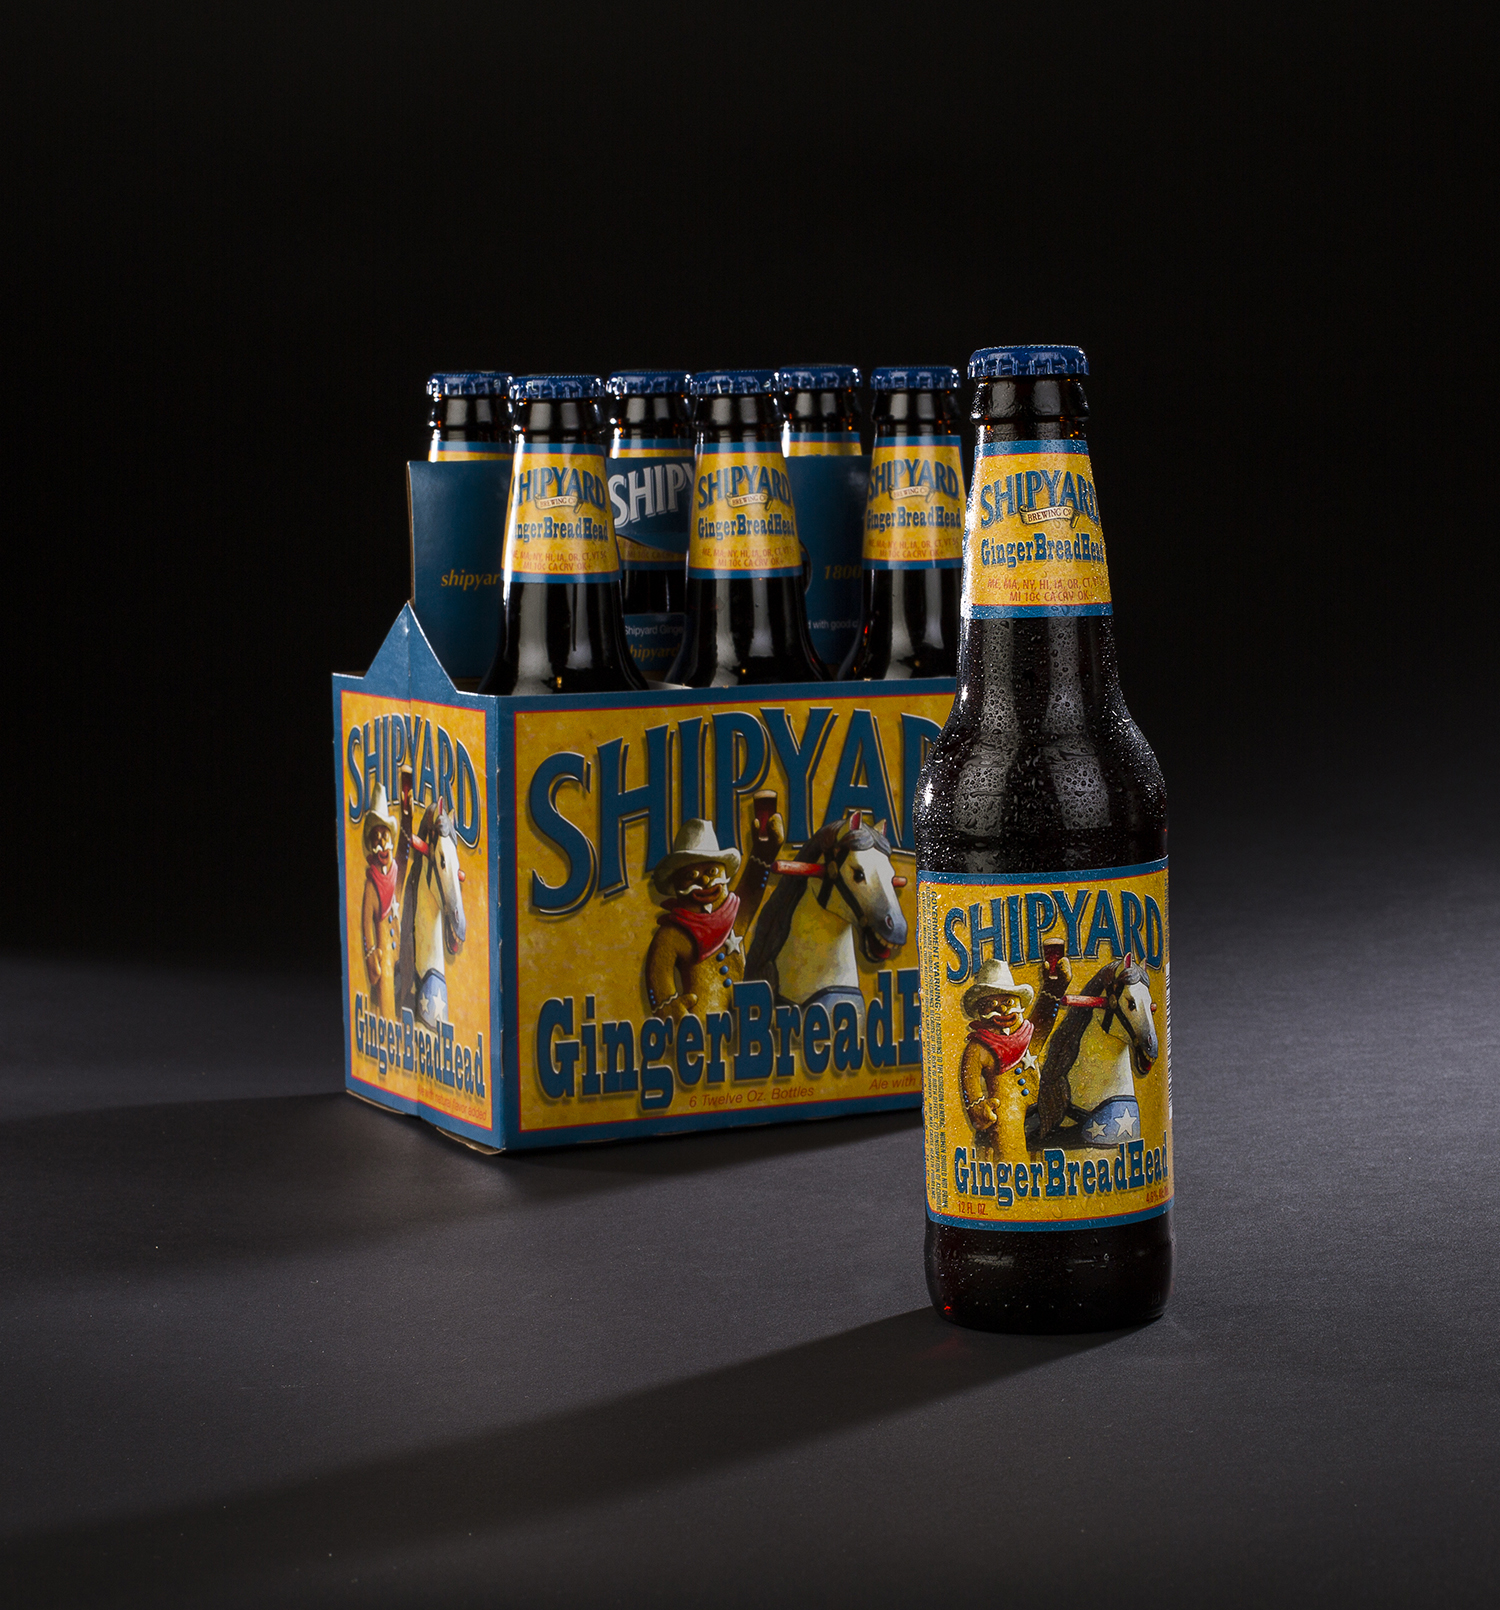 Shipyard GingerBreadHead Ale is available in 6-packs, 12-packs, and on draft.